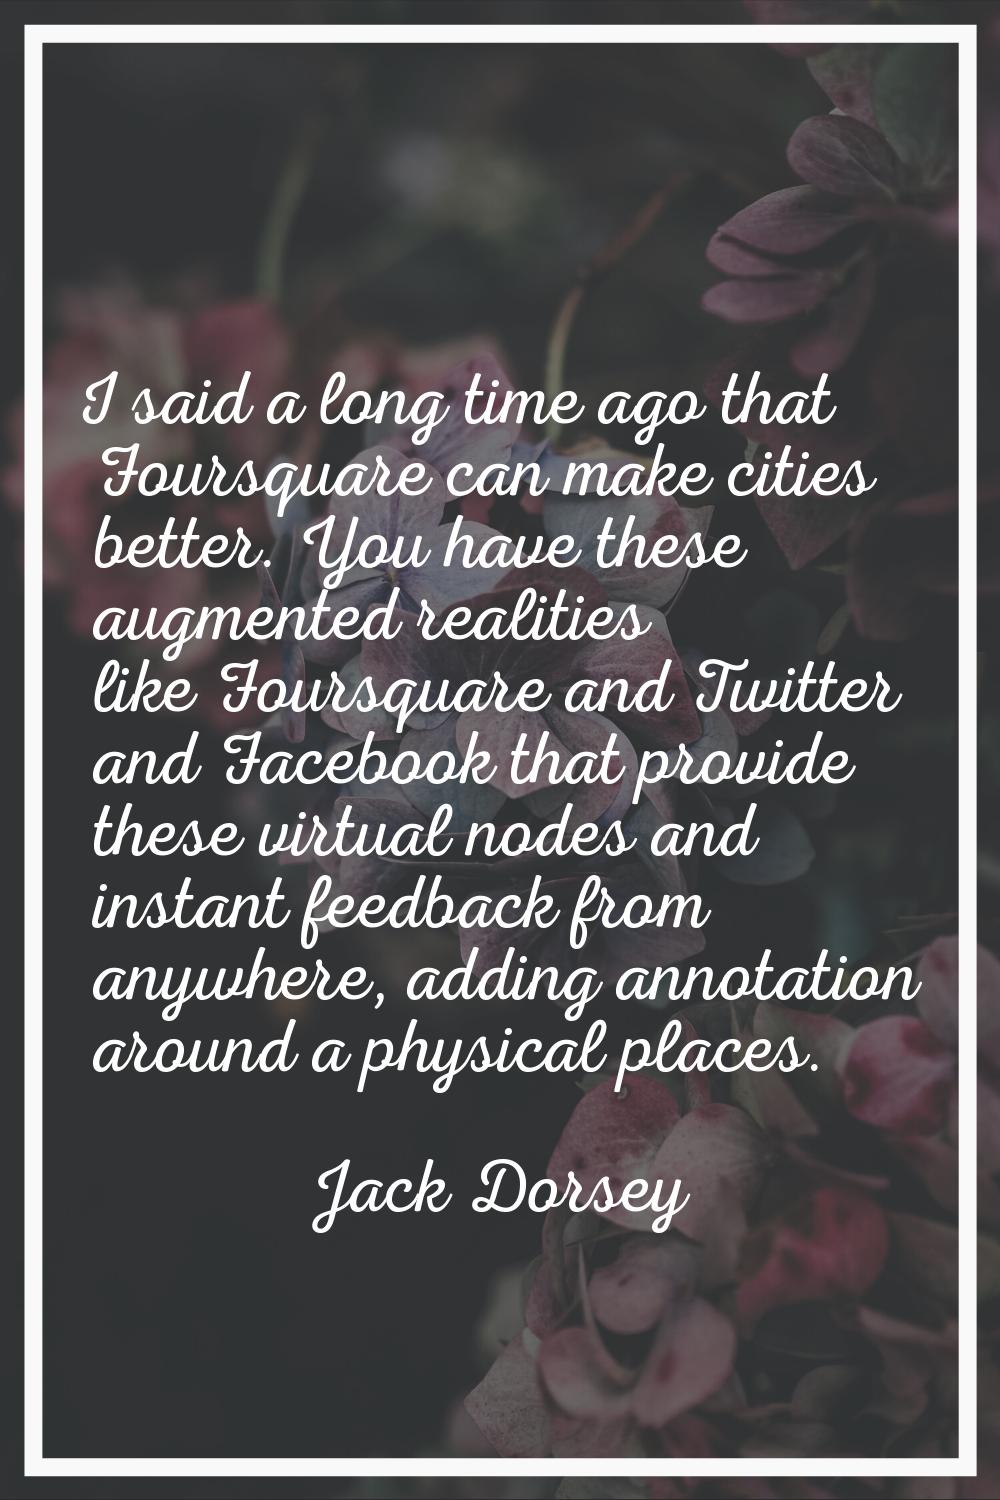 I said a long time ago that Foursquare can make cities better. You have these augmented realities l